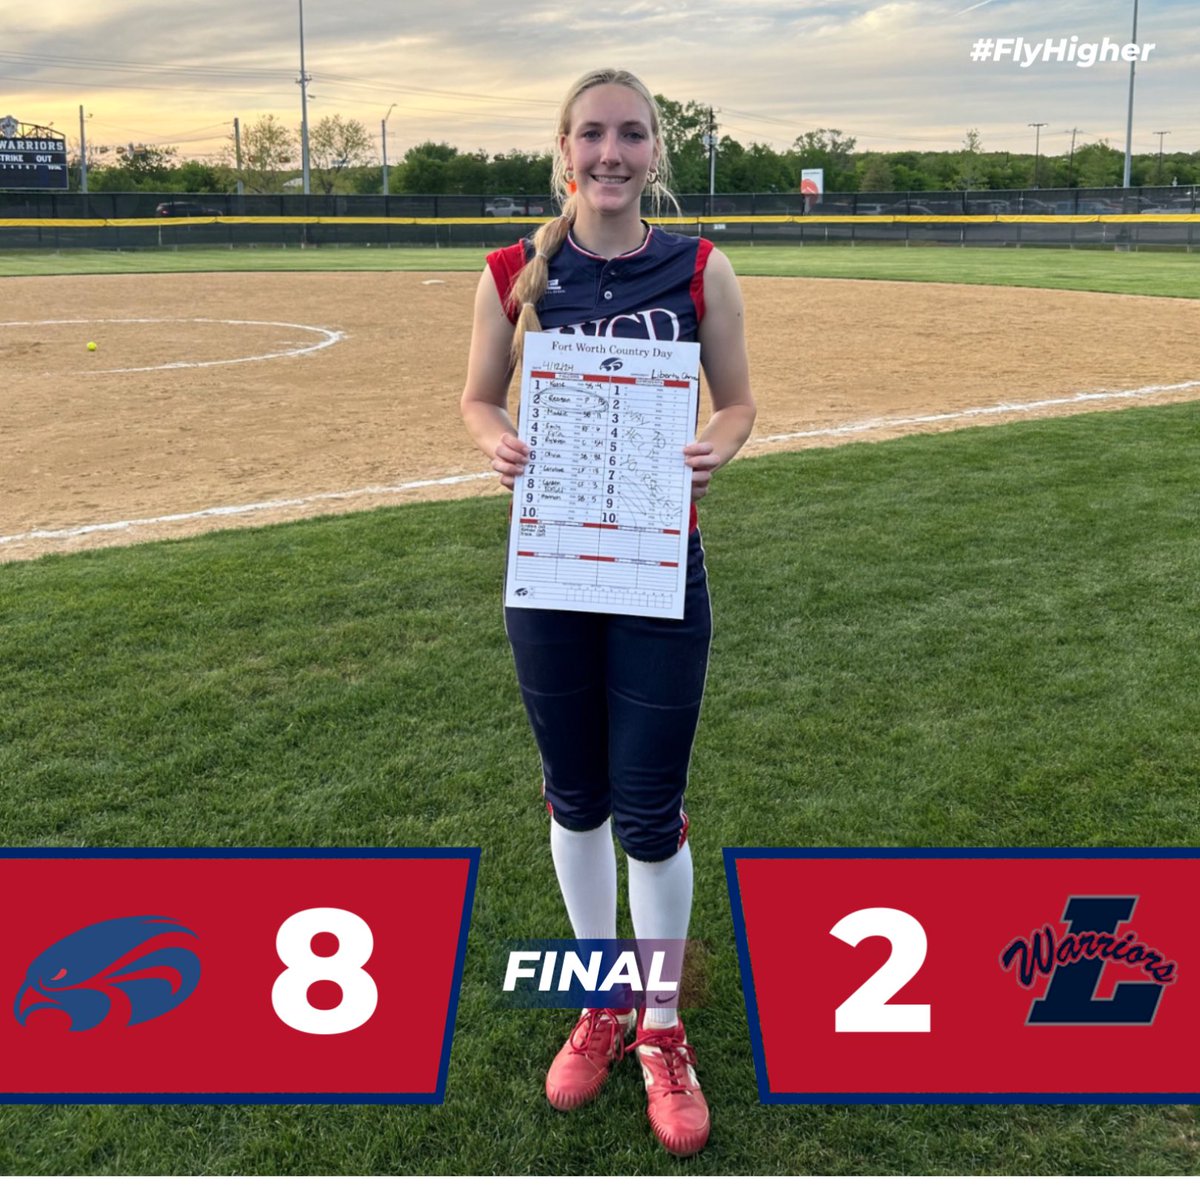 A battle in Argyle tonight! Total team effort breaking the game open in the 7th. @ReaganHall2024 earns the Game Card. She threw a complete game; 2 hits, 1 ER and striking out 14. She also drove in a couple of runs as well. Way to go, Falcons!!! #LEAD #FWCD #FlyHigher